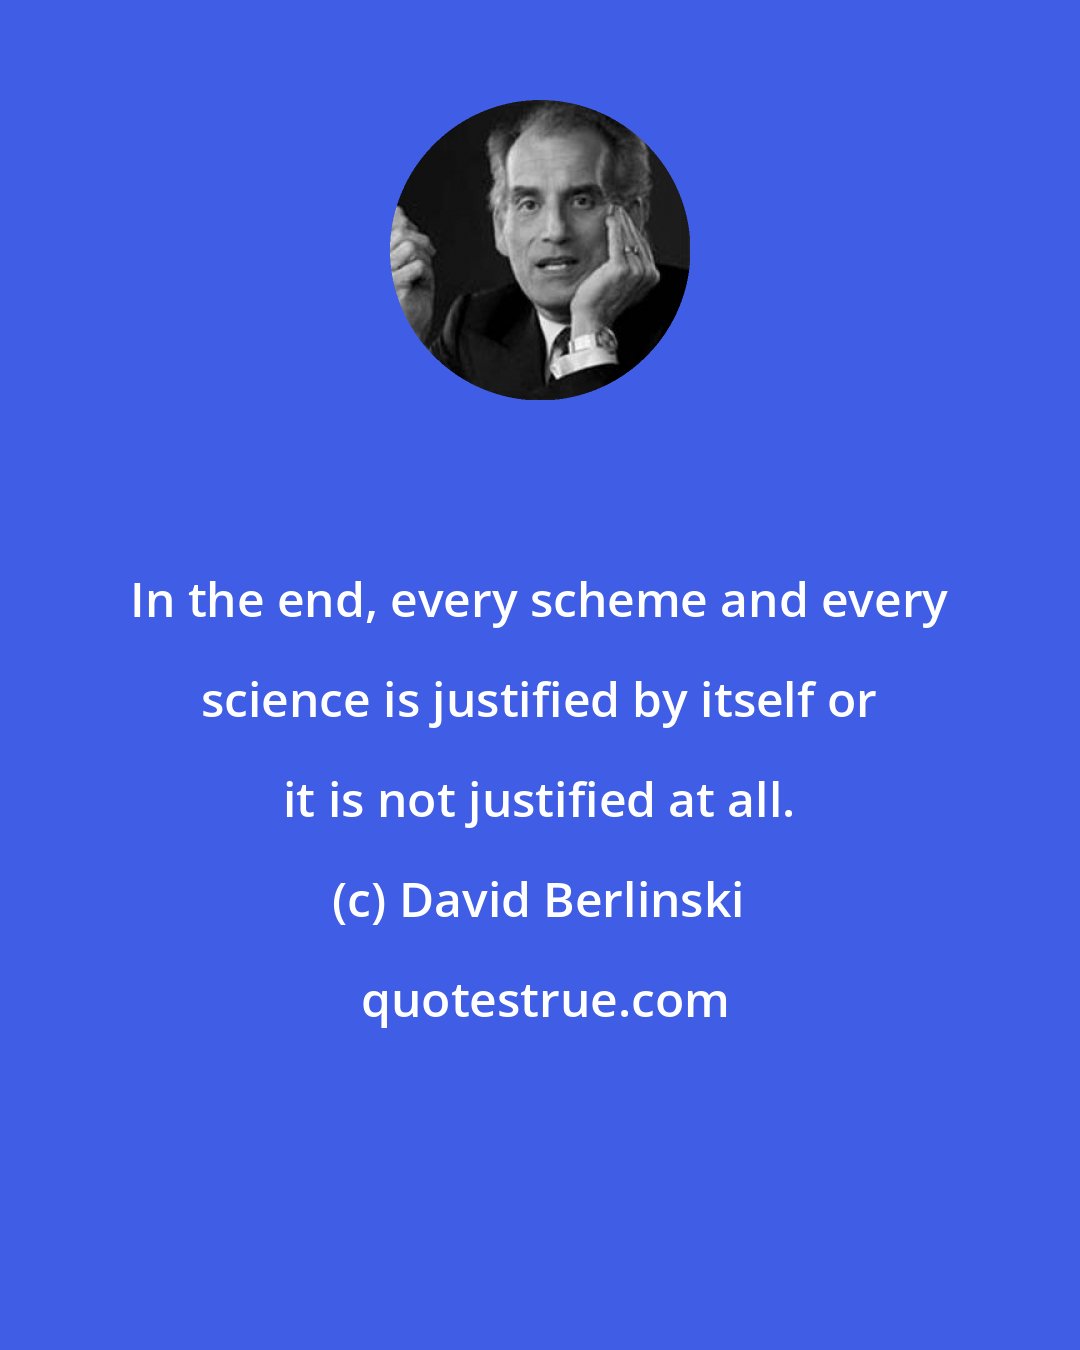 David Berlinski: In the end, every scheme and every science is justified by itself or it is not justified at all.